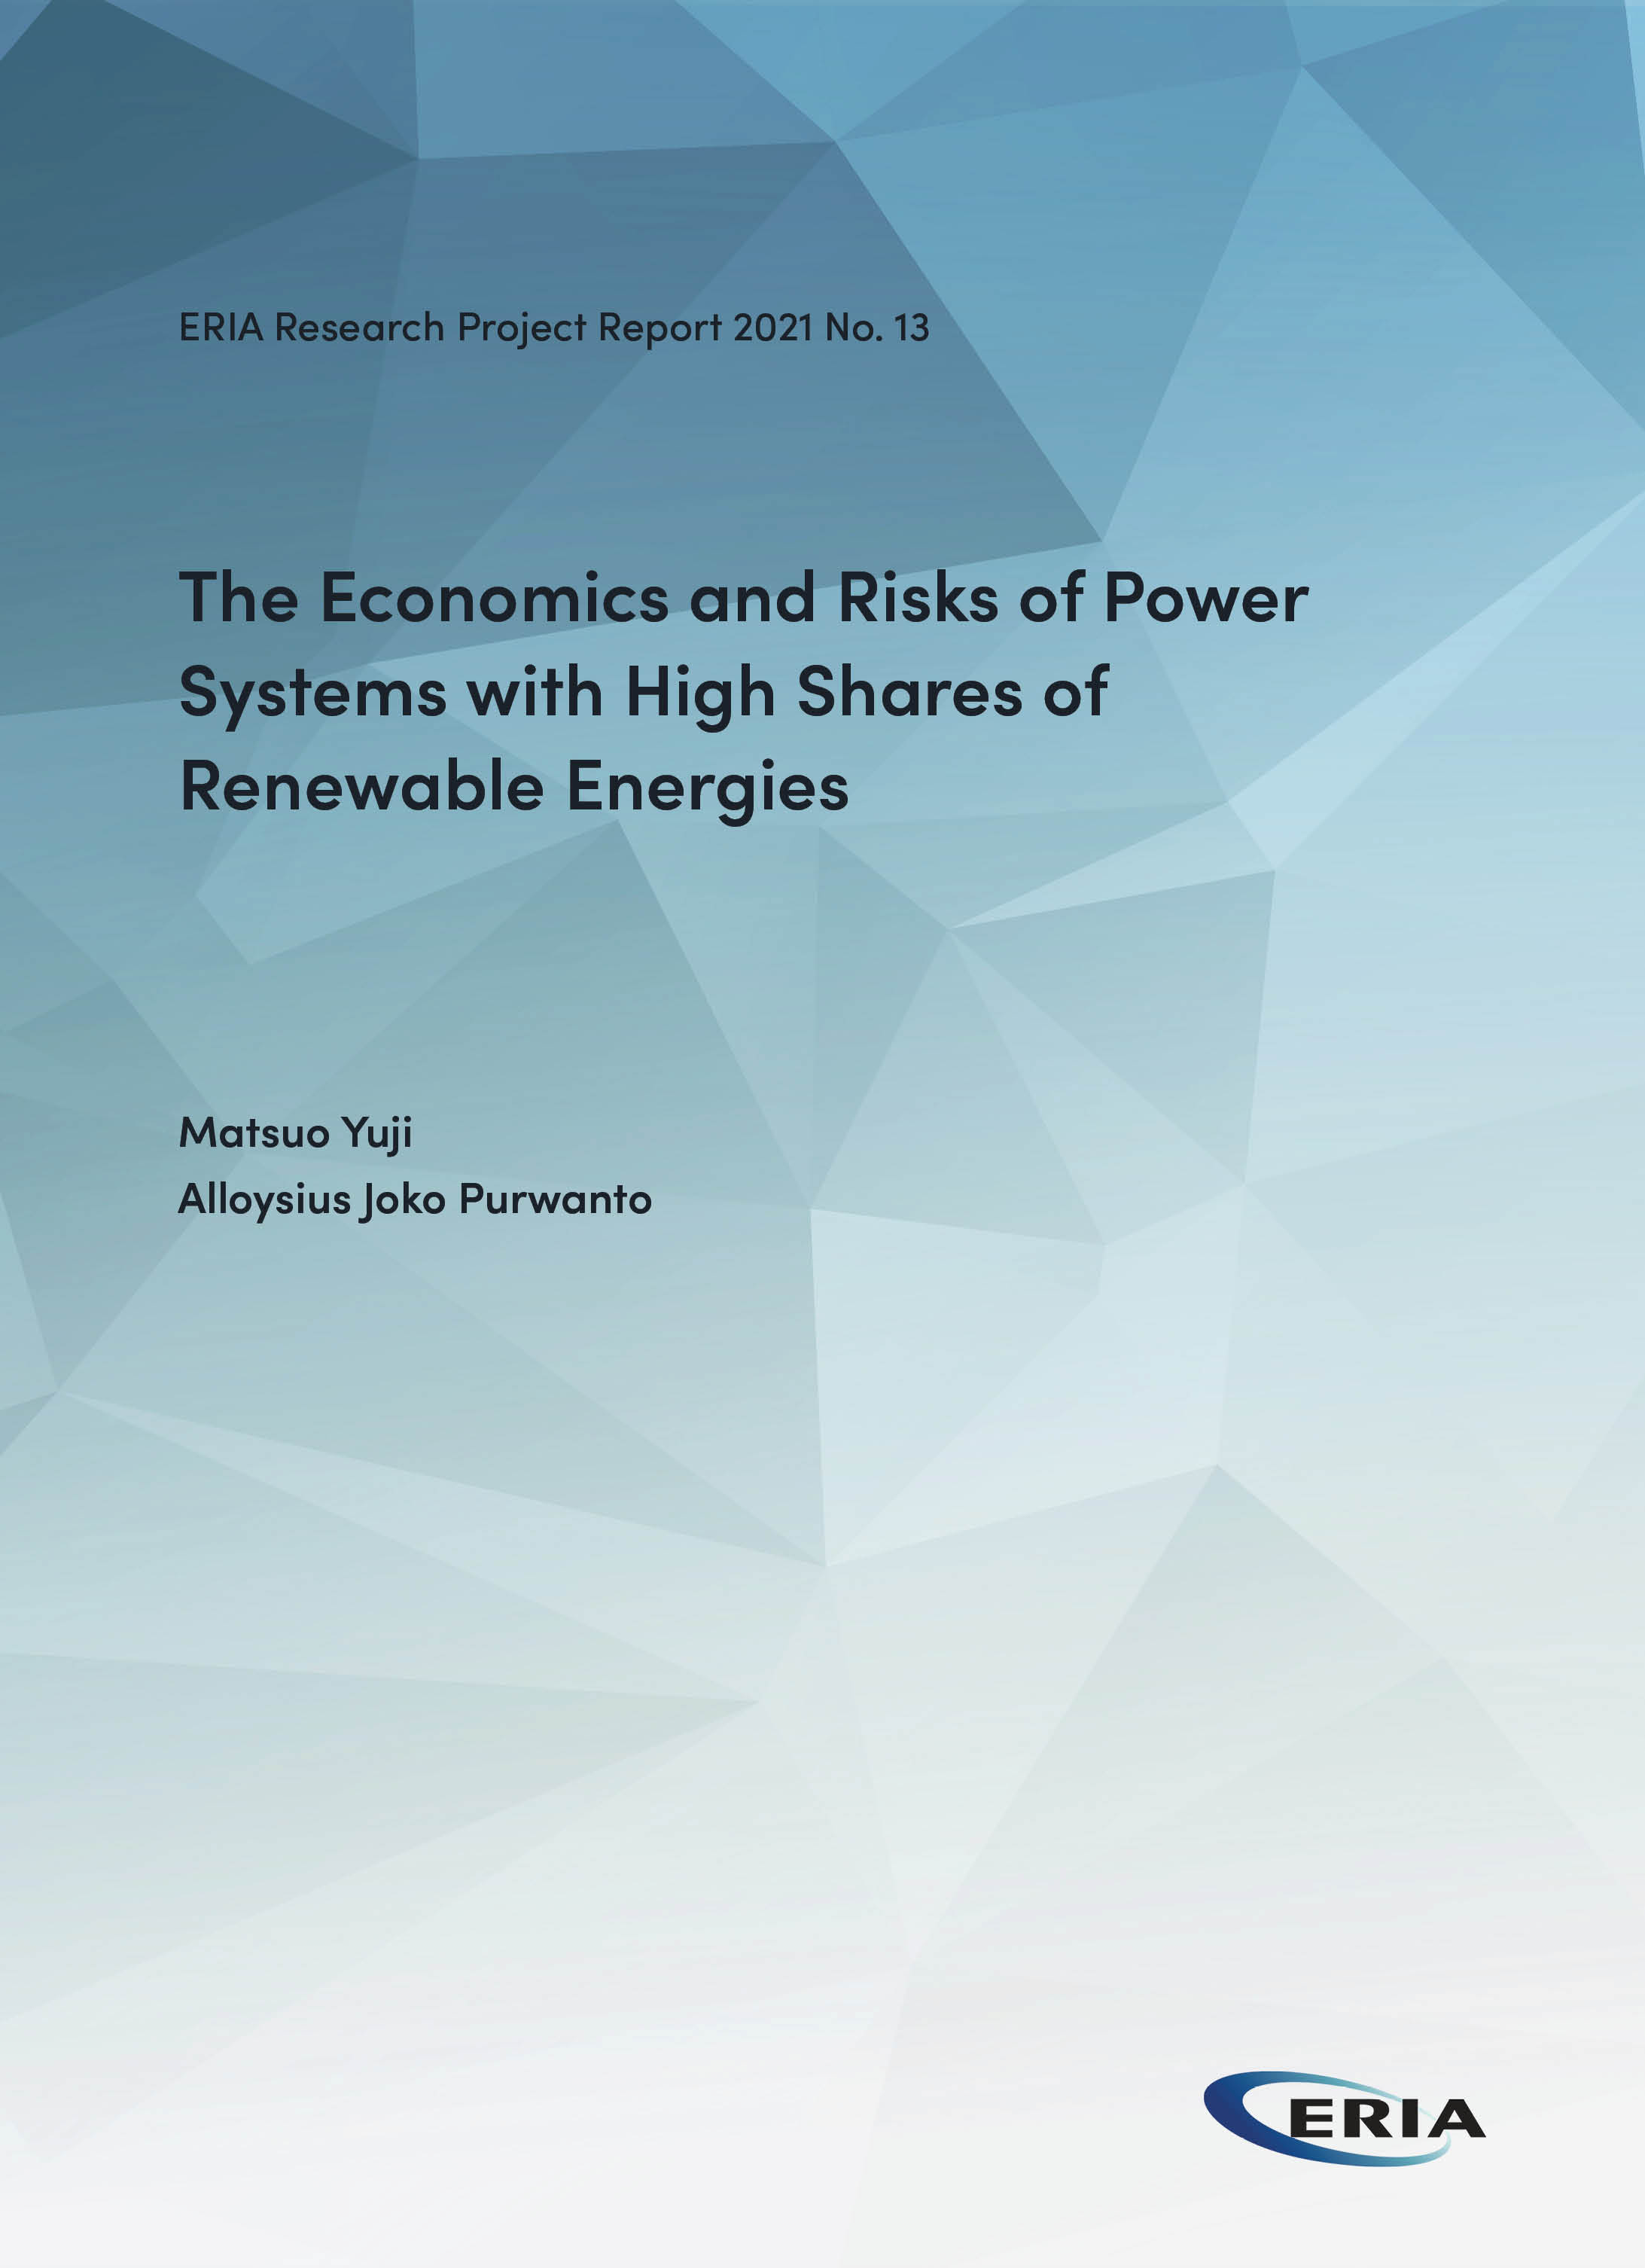 The Economics and Risks of Power Systems with High Shares of Renewable Energies